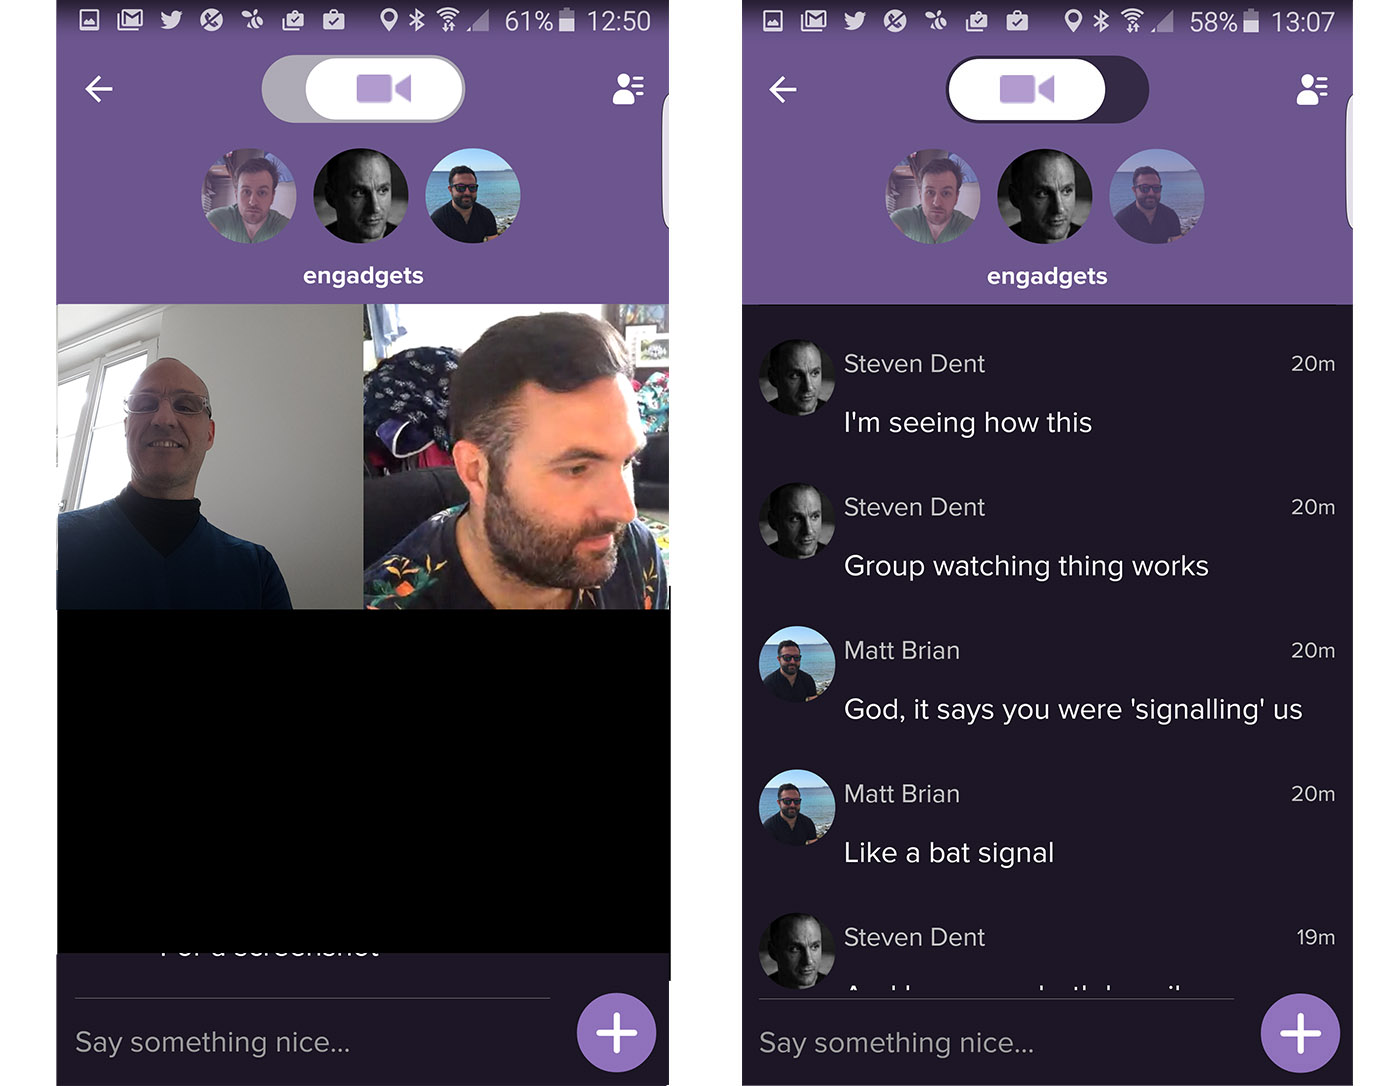 Sean Parker revives Airtime as group video chat app